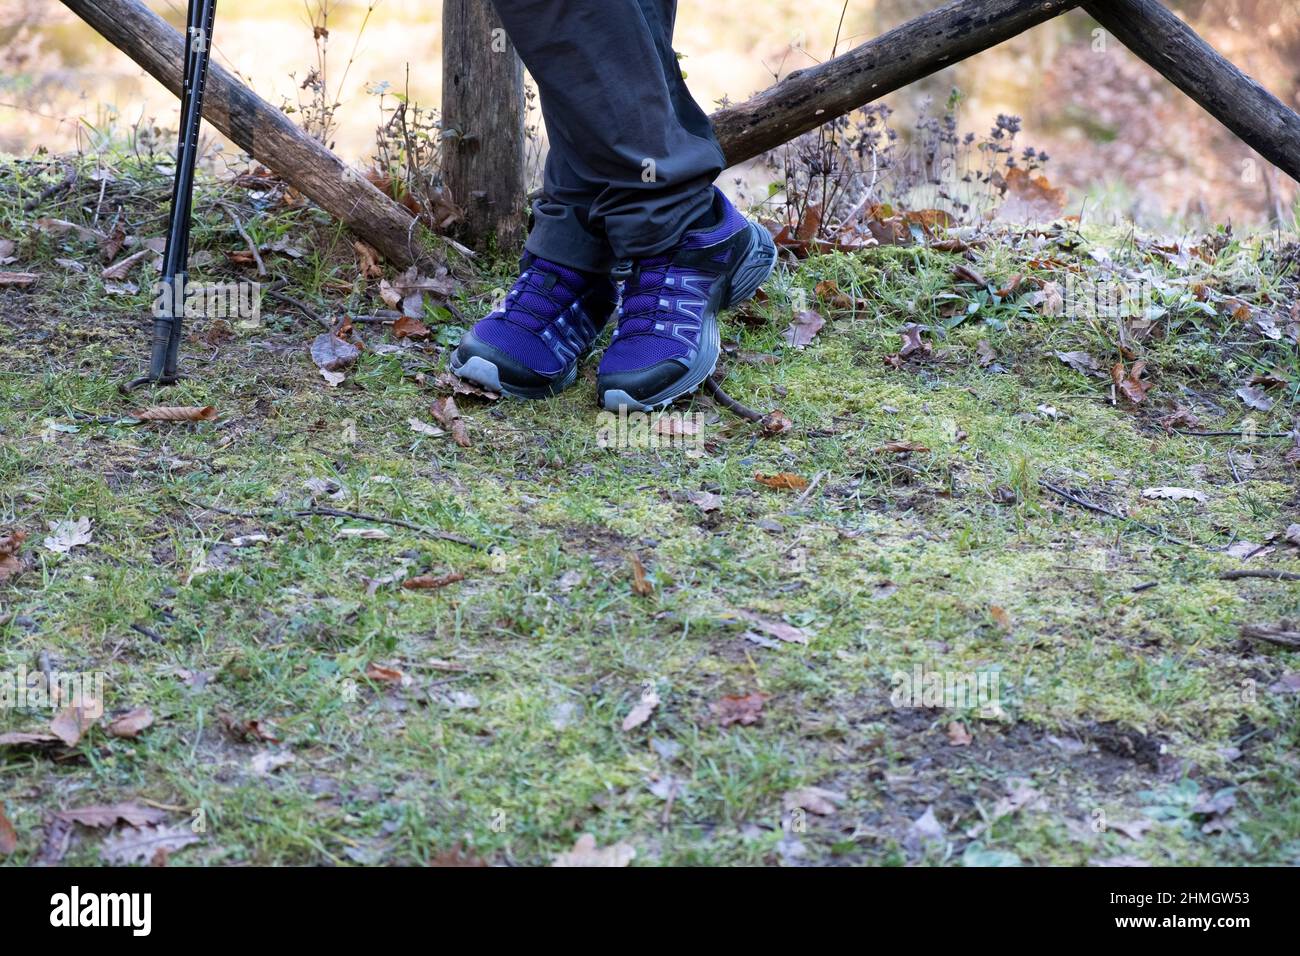 Hiking or trekking shoes. Technical outdoor boots. Stock Photo